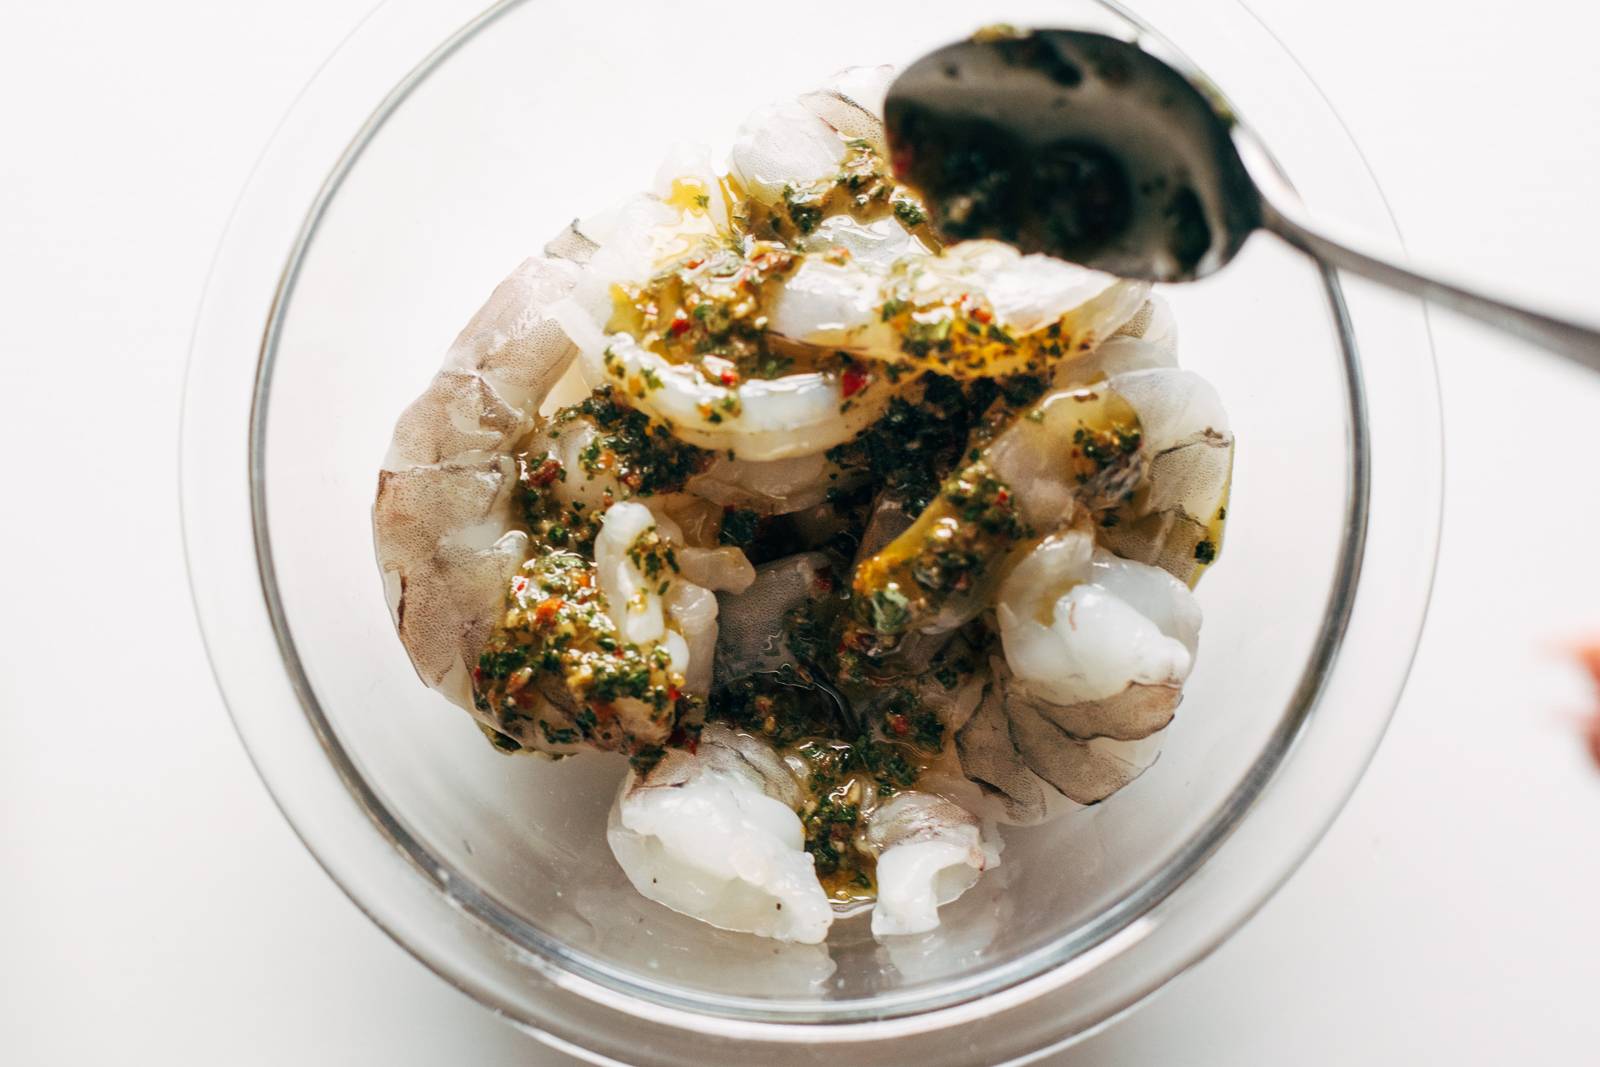 Spooning chimichurri sauce onto raw shrimp in a bowl.